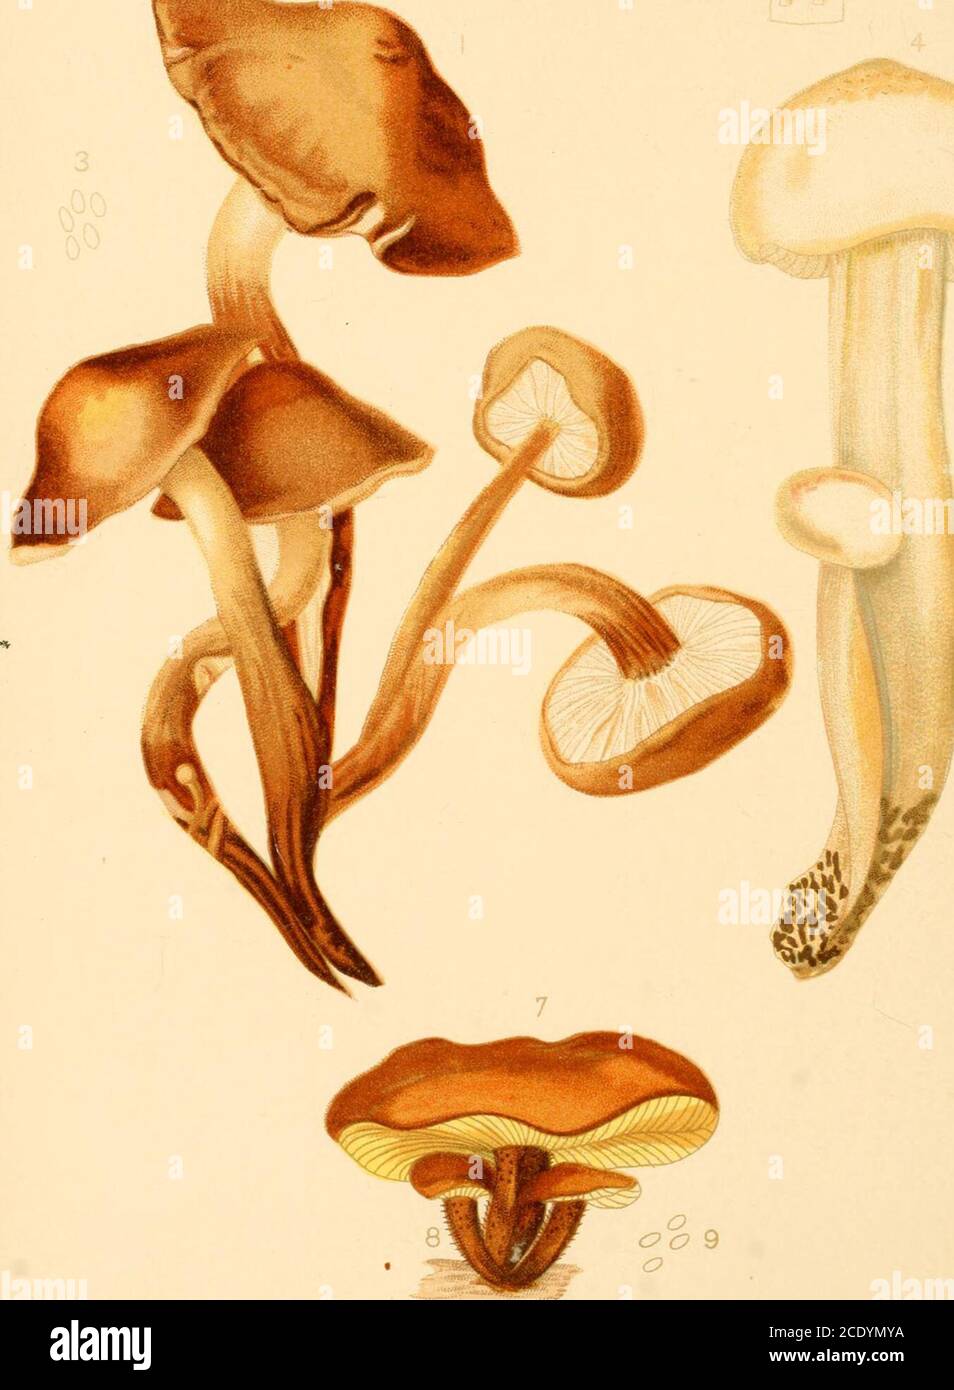 . Student's hand-book of mushrooms of America edible and poisonous . ls ventricose, crowded, purplish, changing torust color; stem short, hollow or stuffed, cartilaginous, equal, pallid, red-dish brown, or tinged with violet; veil white. Subgenus Collybia Fries. Cap at first convex, then expanded, not de-pressed, with an involute margin; gills reaching the stem, but not decur-rent, sometimes emarginate; stem hollow, with cartilaginous bark of adifferent substance from the hymenophore, but confluent with it; oftenswollen and splitting in the middle; spores white. The plants are usuallyfound gro Stock Photo